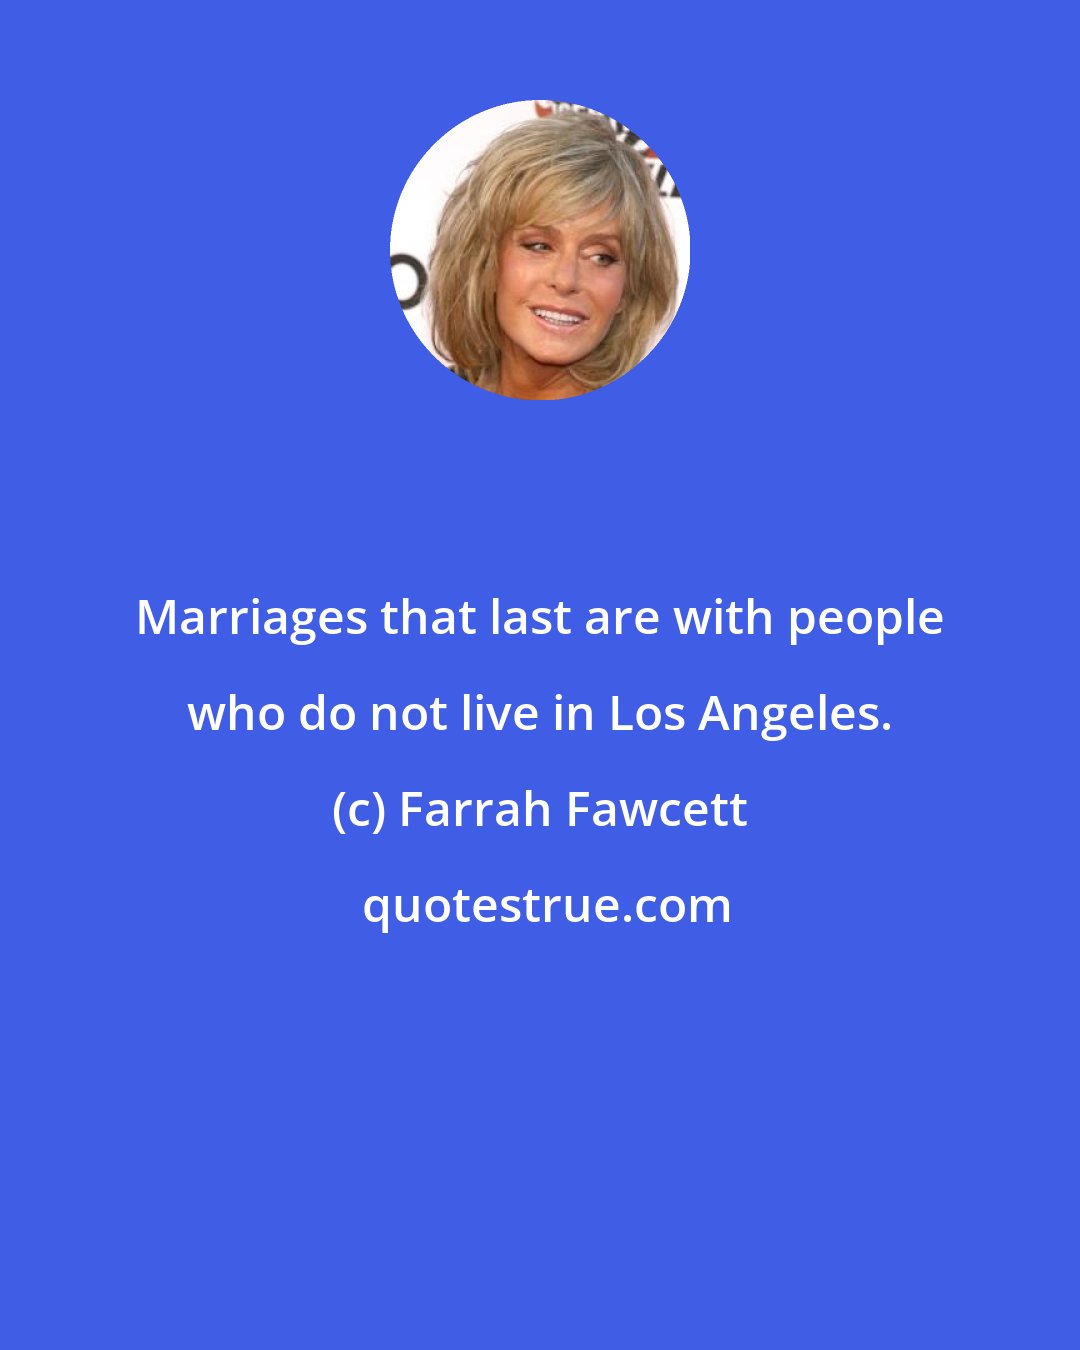 Farrah Fawcett: Marriages that last are with people who do not live in Los Angeles.